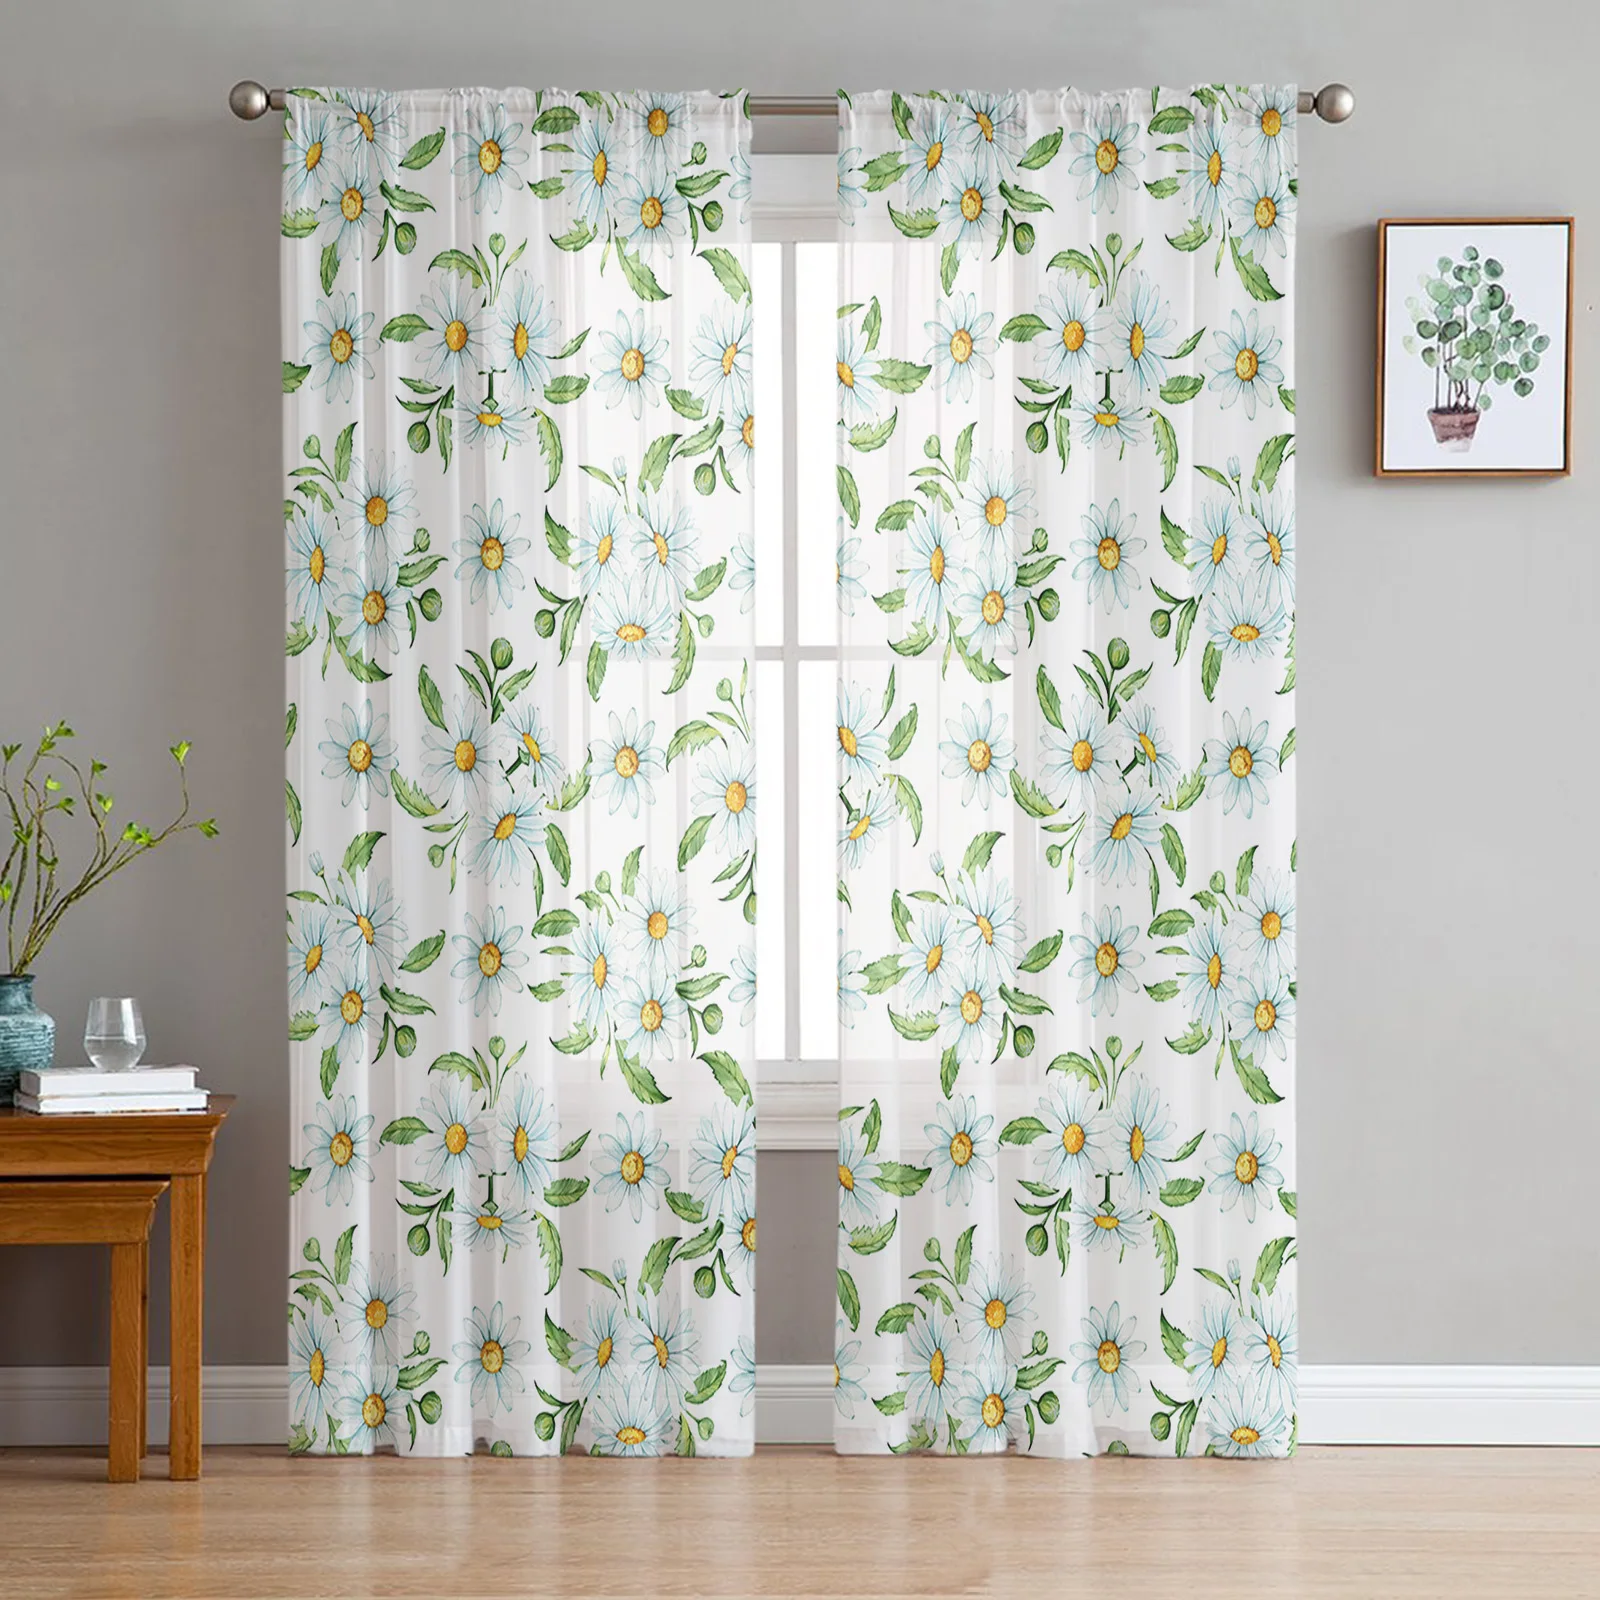 

Spring Flower Daisy Watercolor Texture Sheer Curtains for Living Room Voile Curtain Bedroom Tulle Curtains Window Drapes